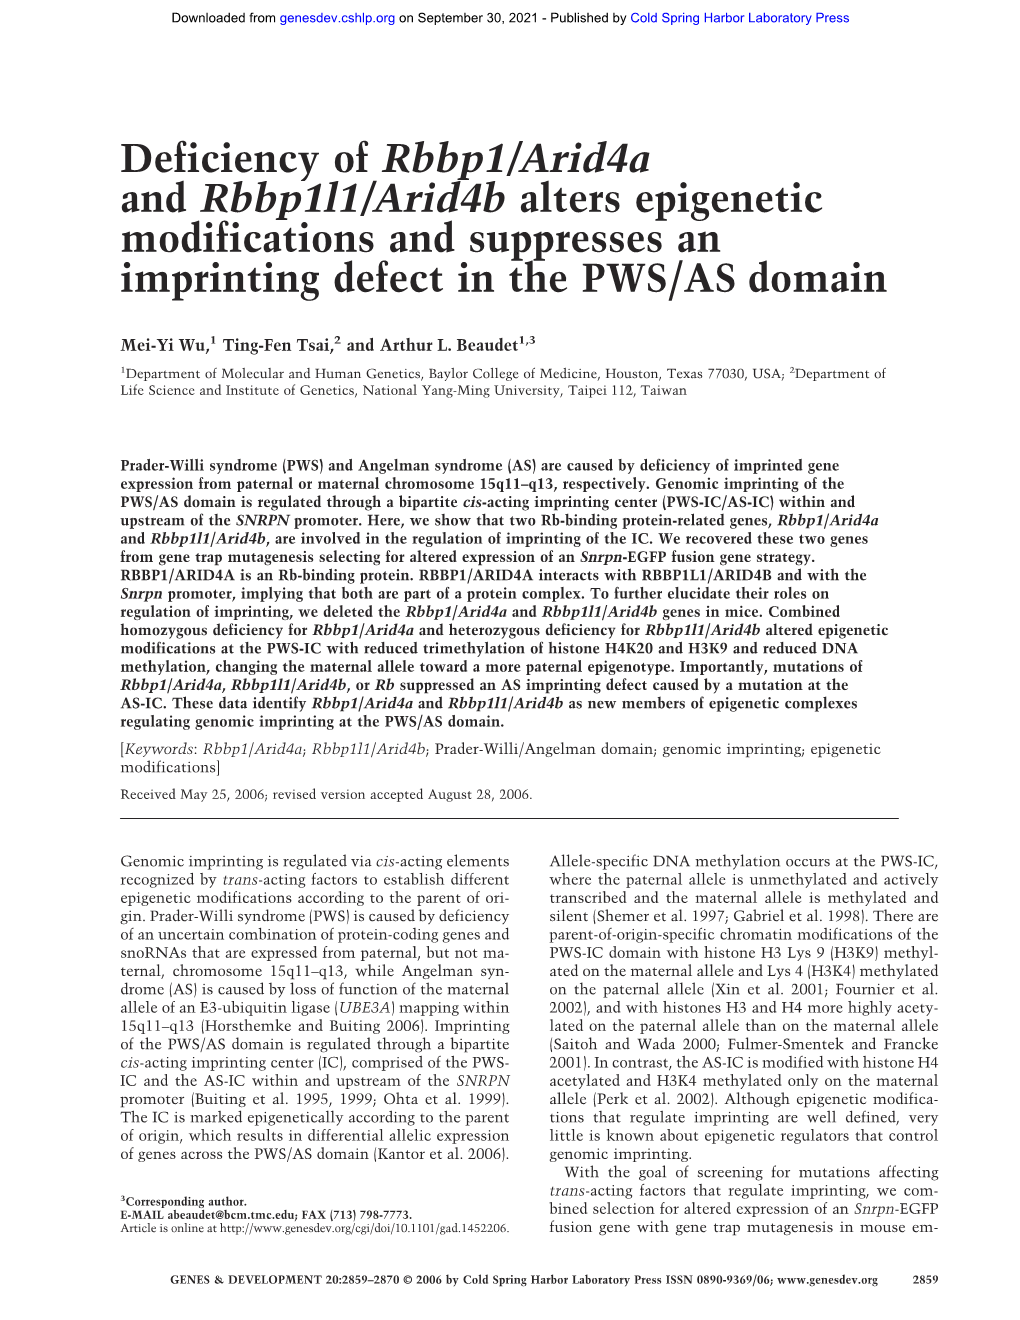 Deficiency of Rbbp1/Arid4a and Rbbp1l1/Arid4b Alters Epigenetic Modifications and Suppresses an Imprinting Defect in the PWS/AS Domain